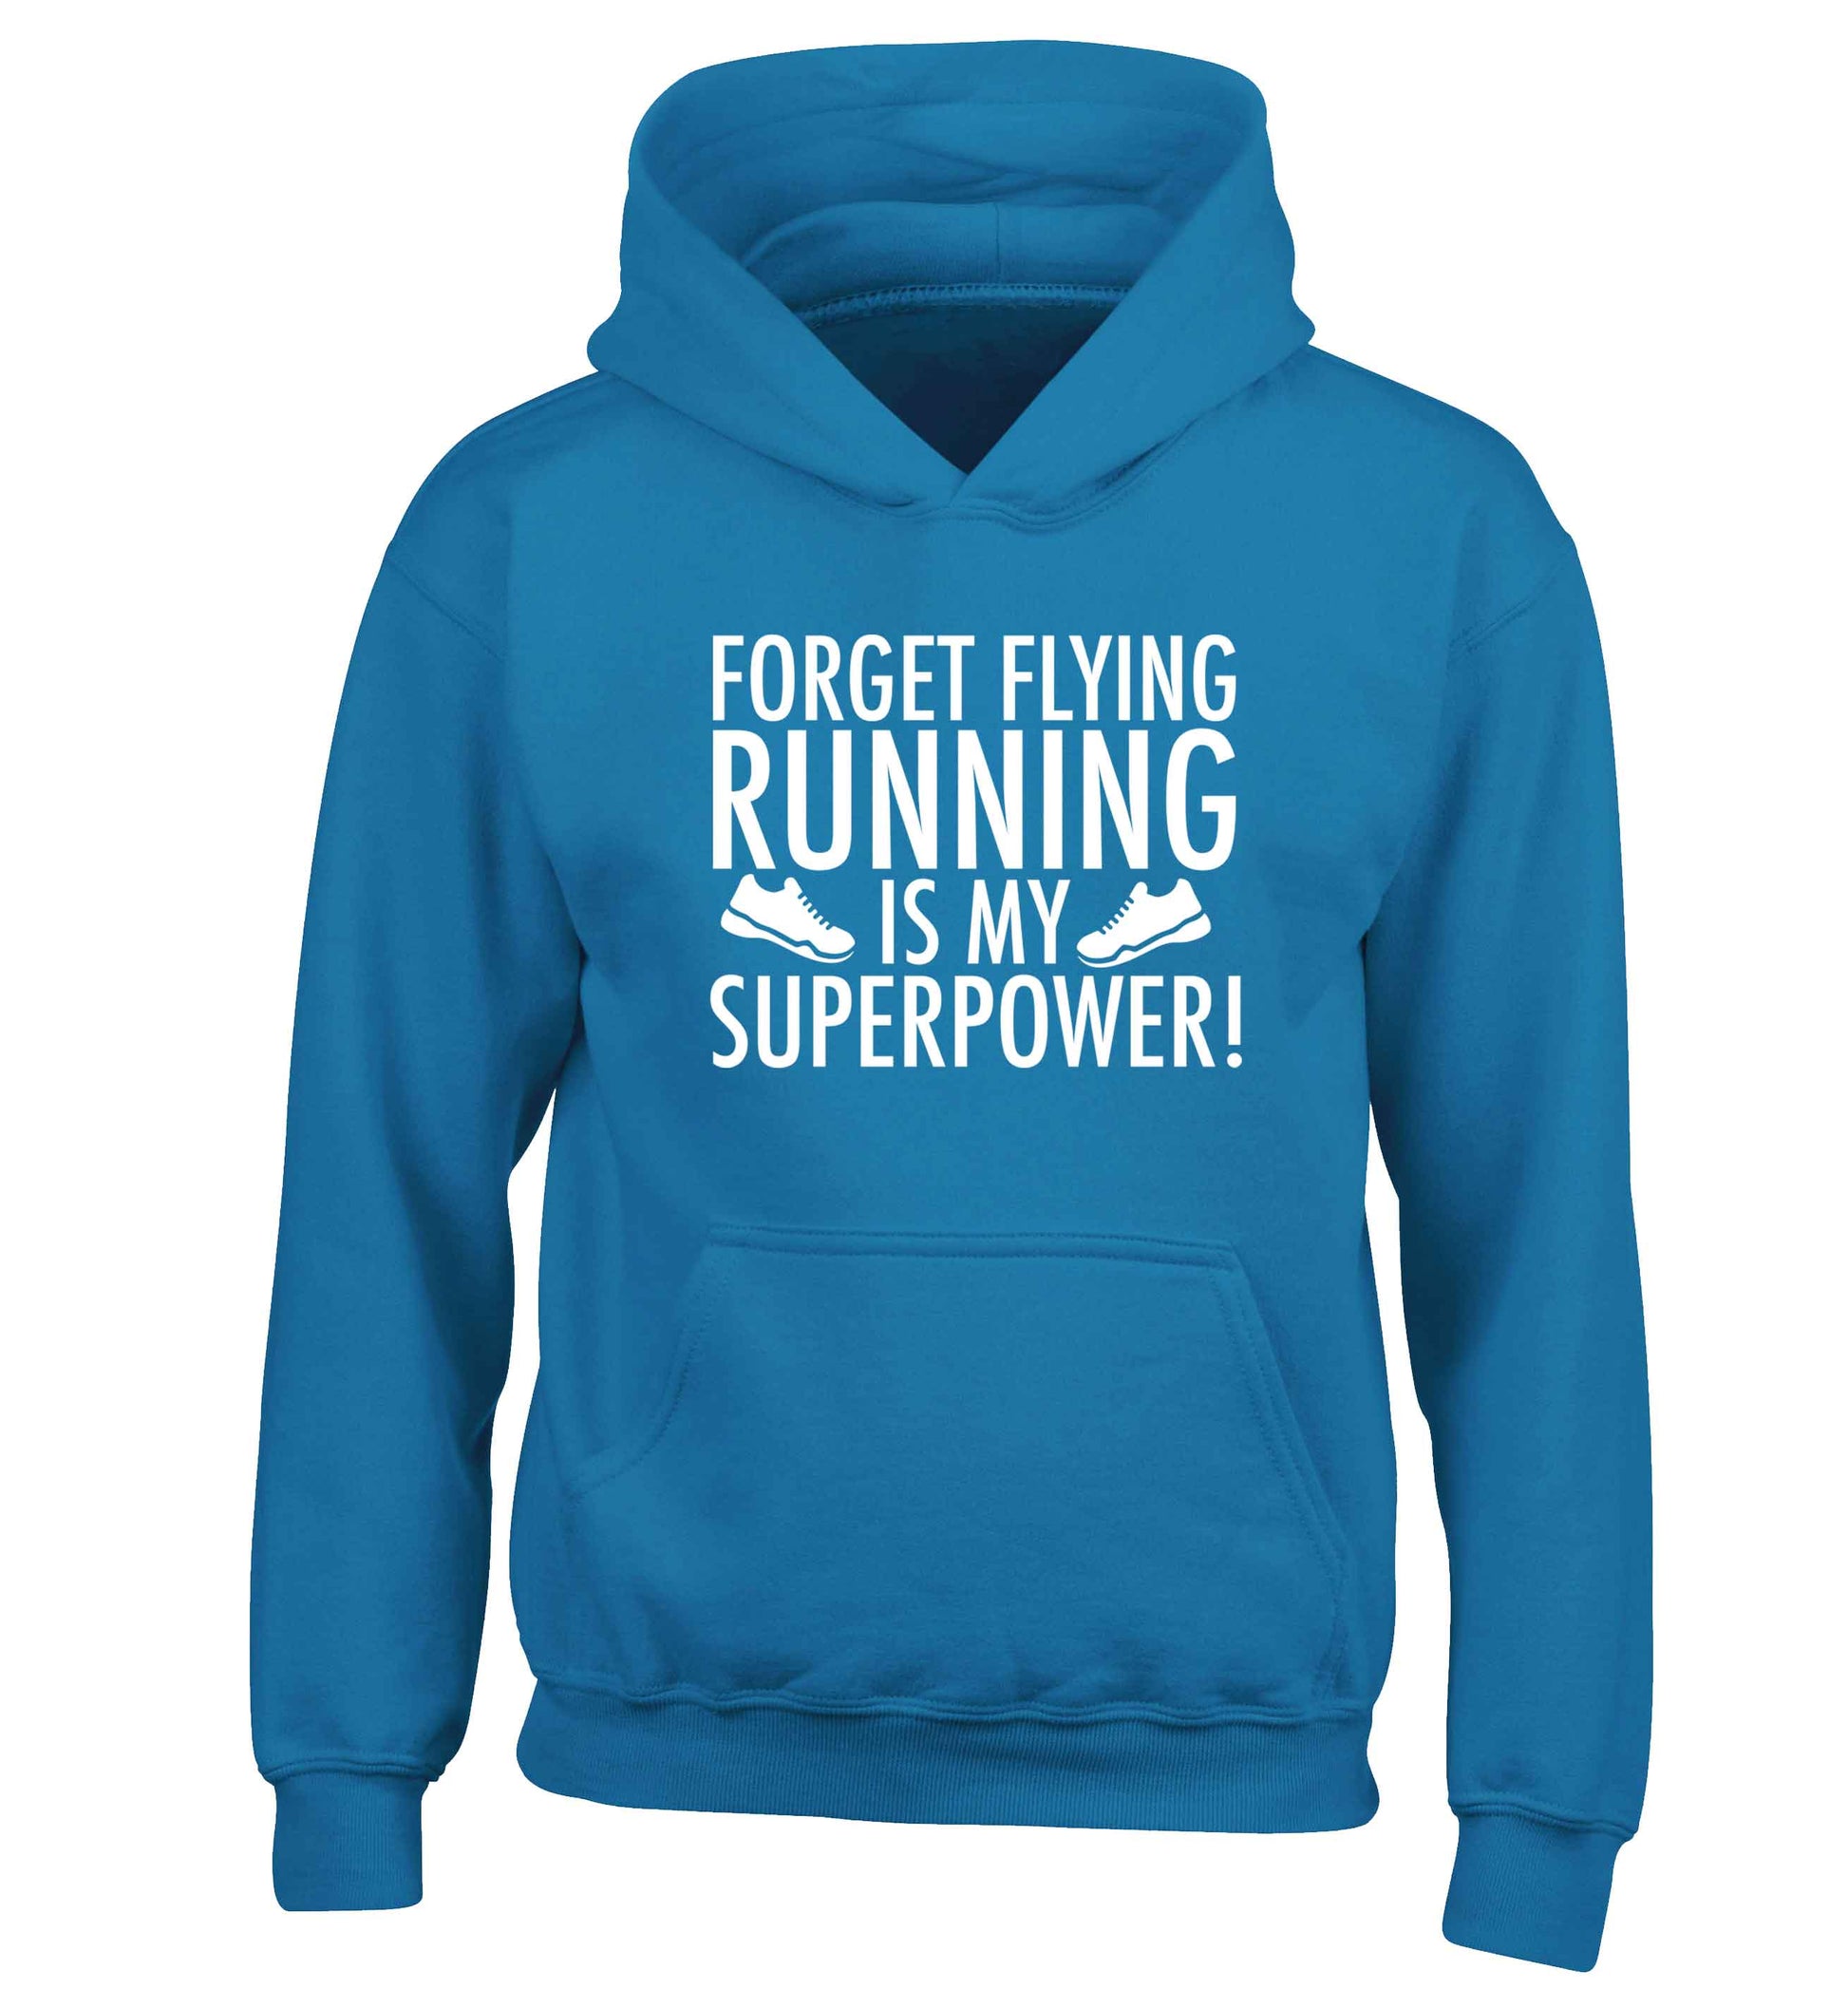 Forget flying running is my superpower children's blue hoodie 12-13 Years